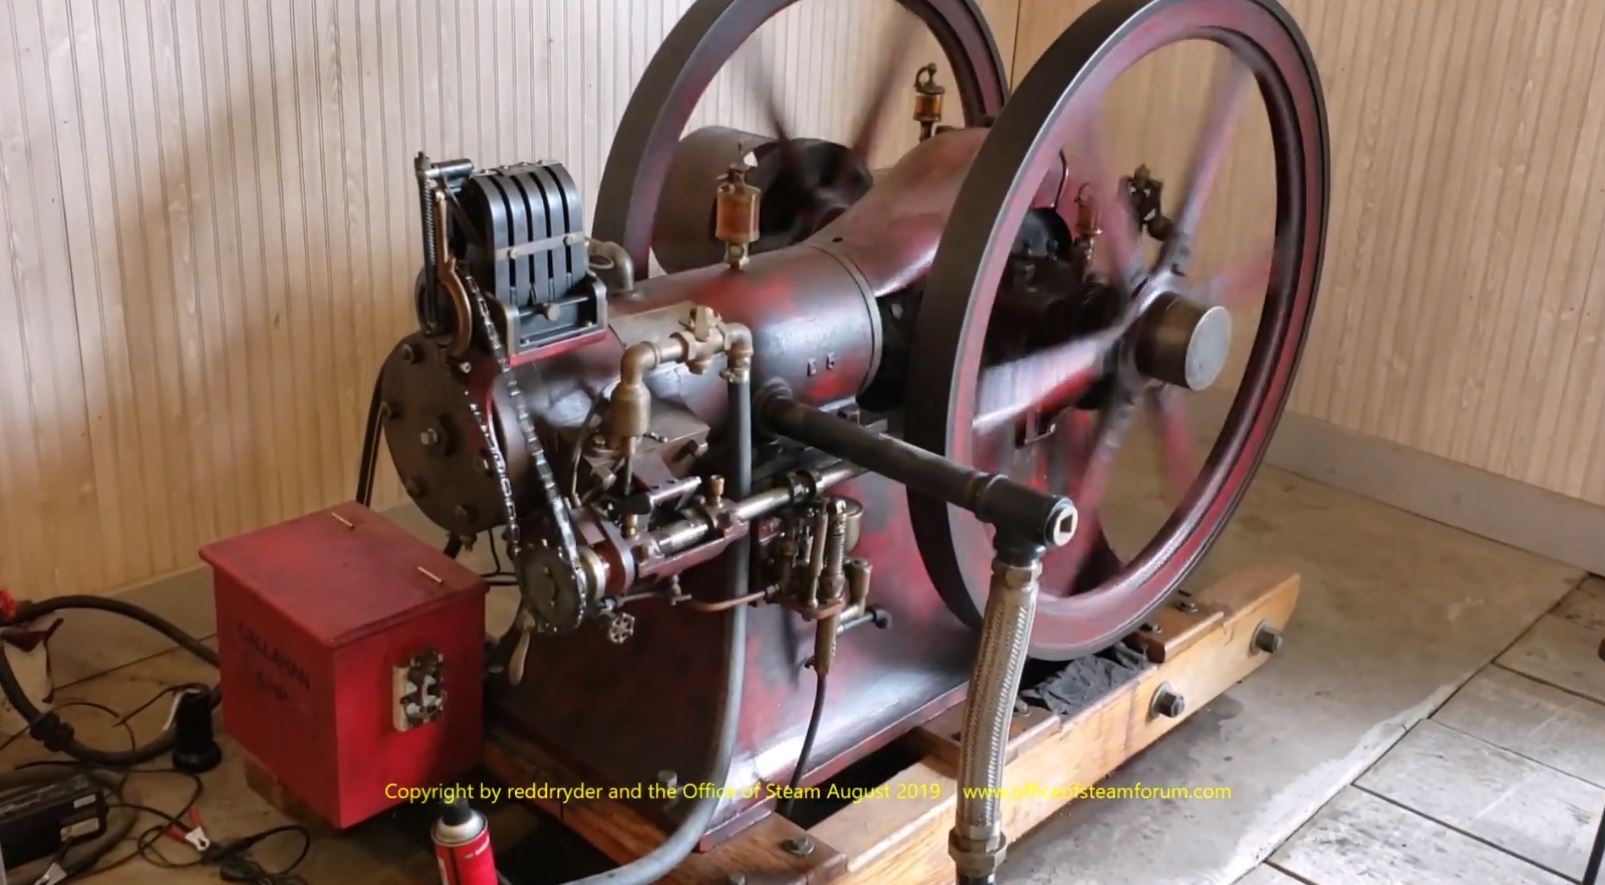 World Class Engines Compilation Best of Rough & Tumble Engineers Gas Steam Traction Hot